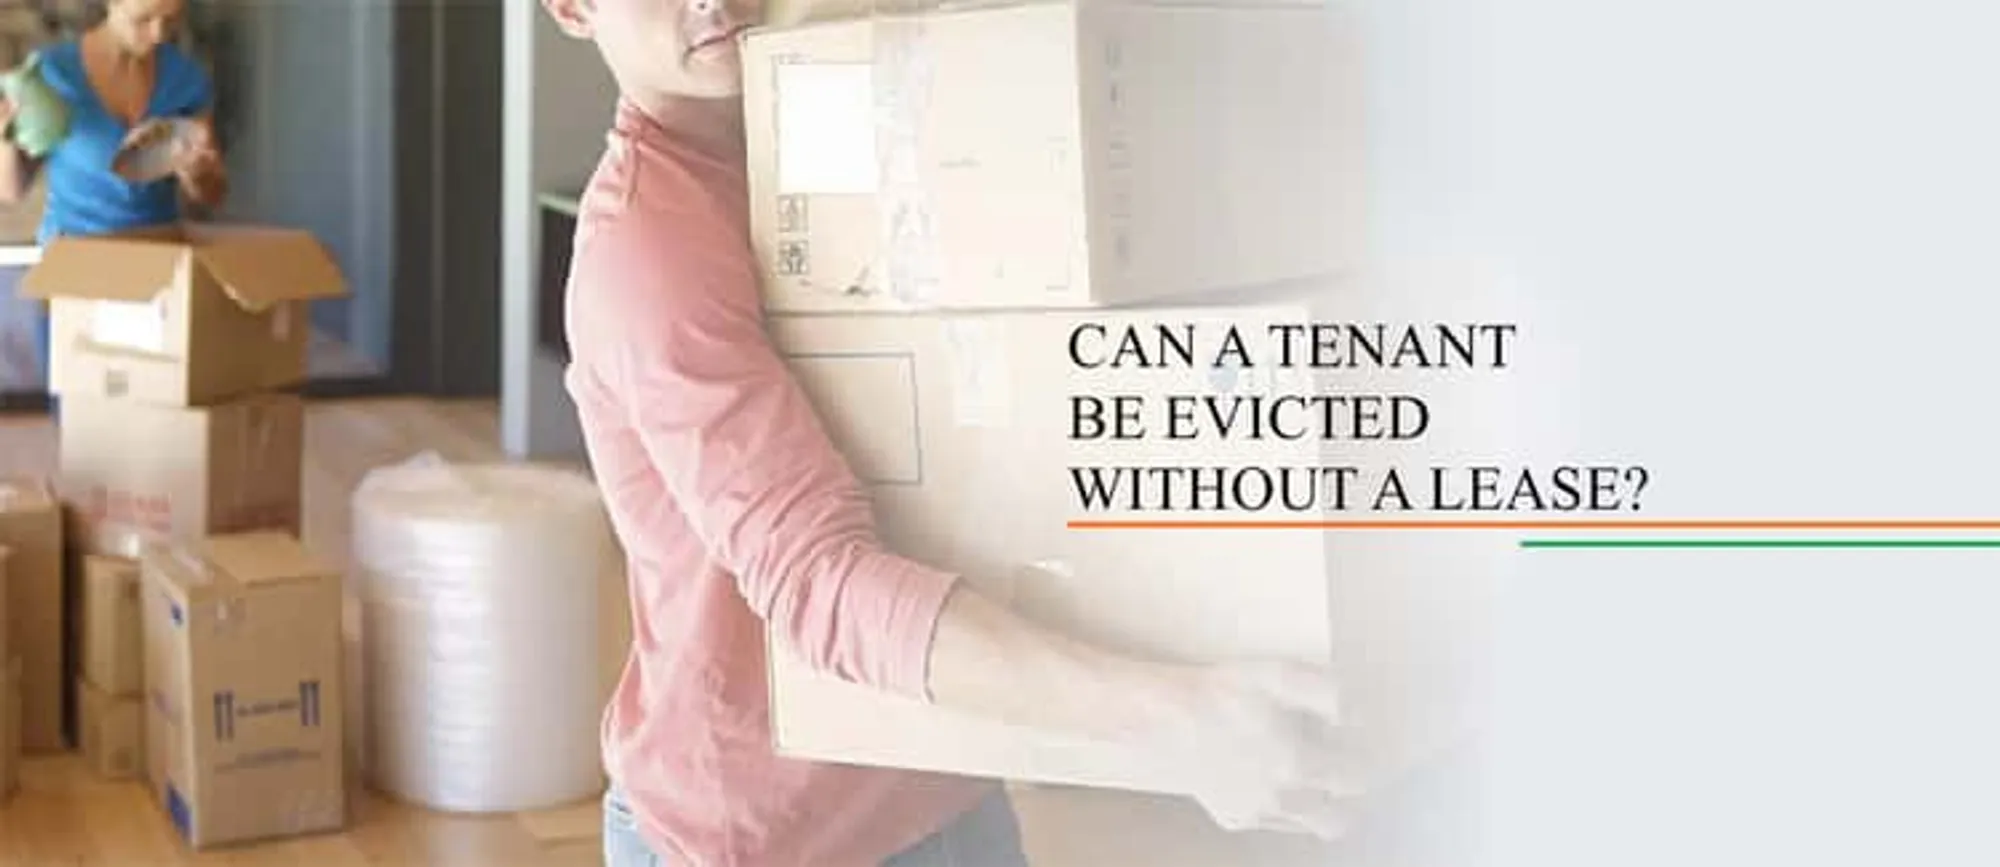 Can A Tenant Be Evicted Without A Lease?